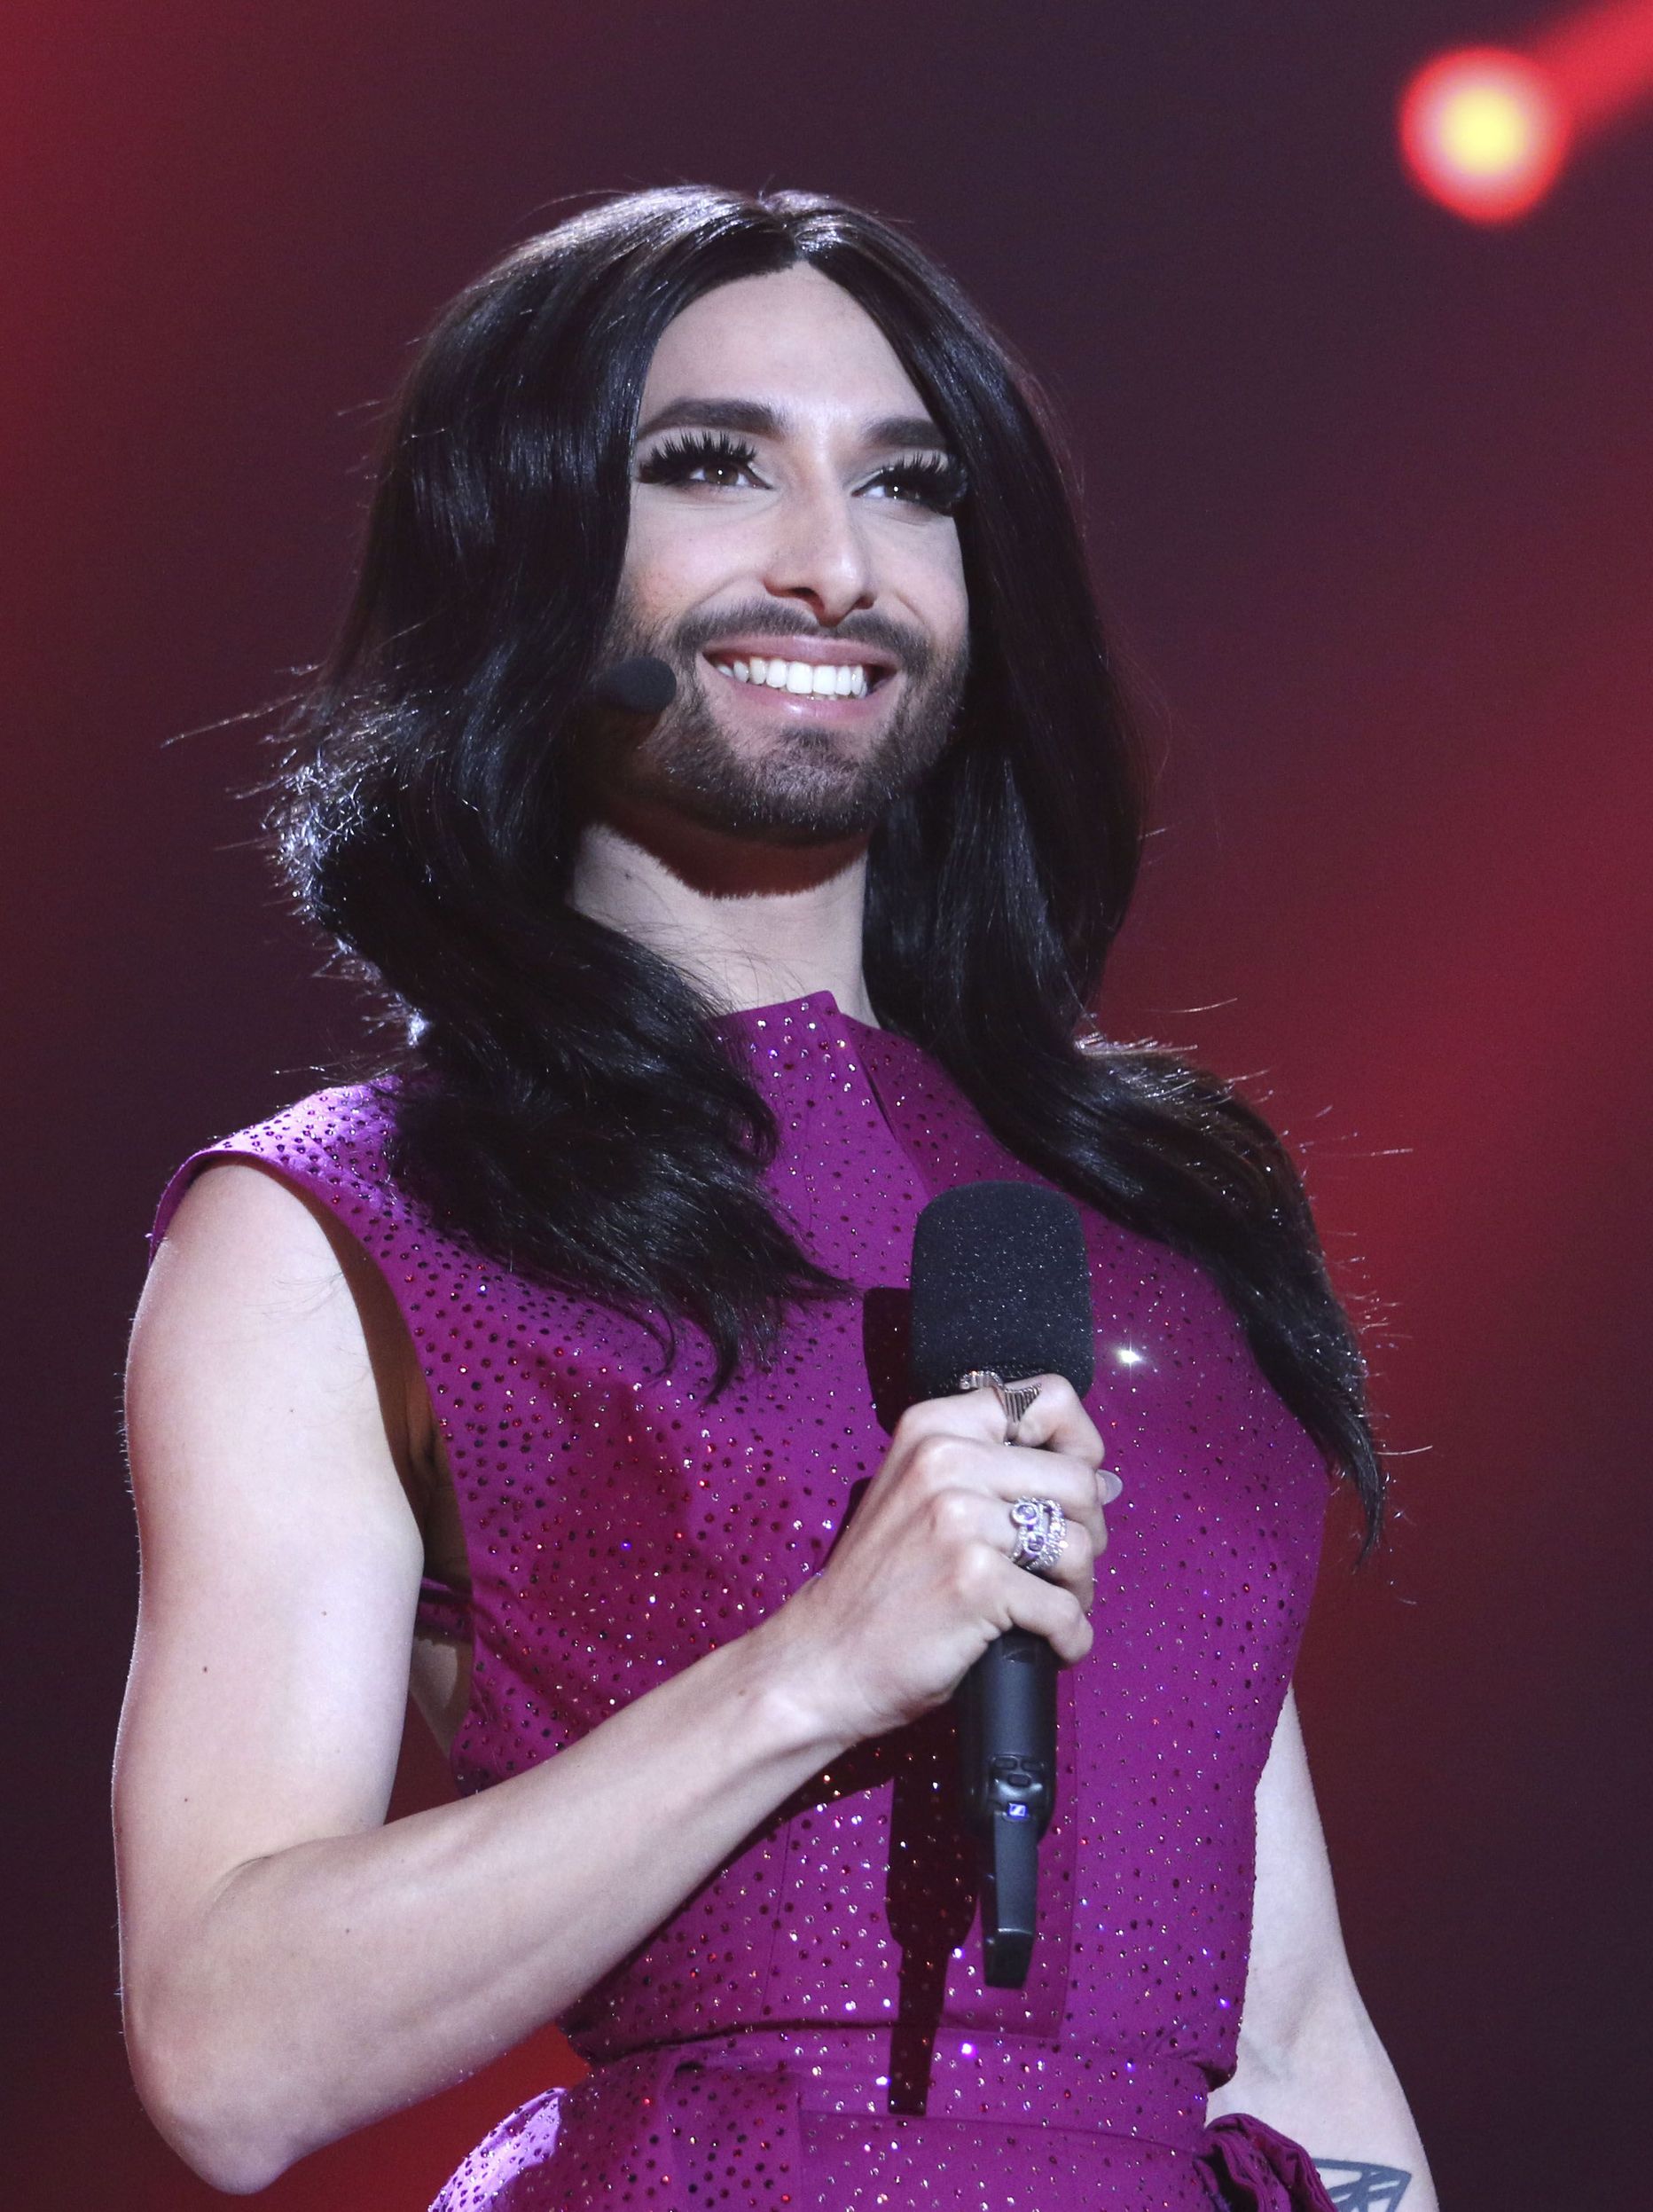 Conchita Wurst, who won the 2014 ESC for Austria, smiles on stage during a dress rehearsal for the final of the Eurovision Song Contest in Austria's capital Vienna, Friday, May 22, 2015. (AP Photo/Ronald Zak)